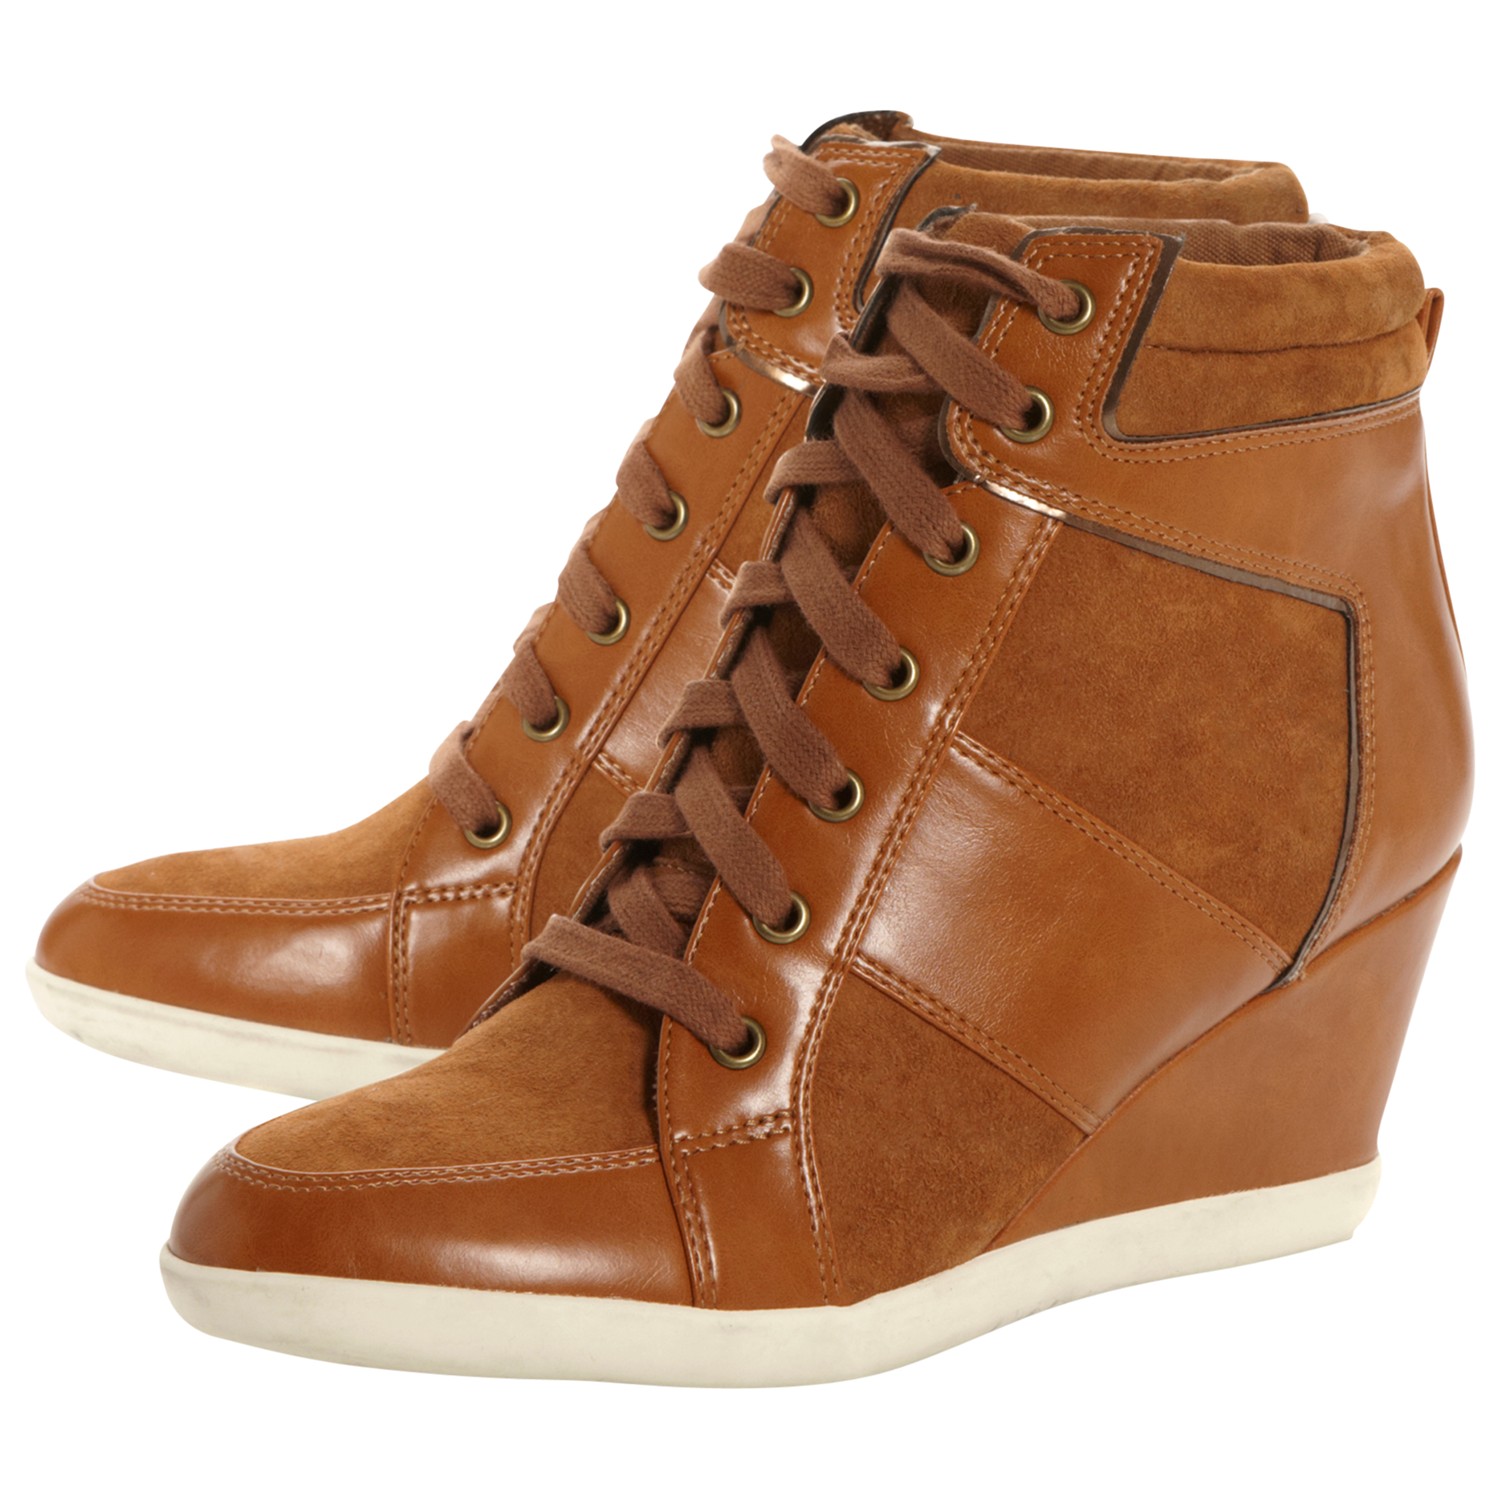 Dune Lapin Suede and Leather Panel Wedge Trainers in Tan (Brown) - Lyst